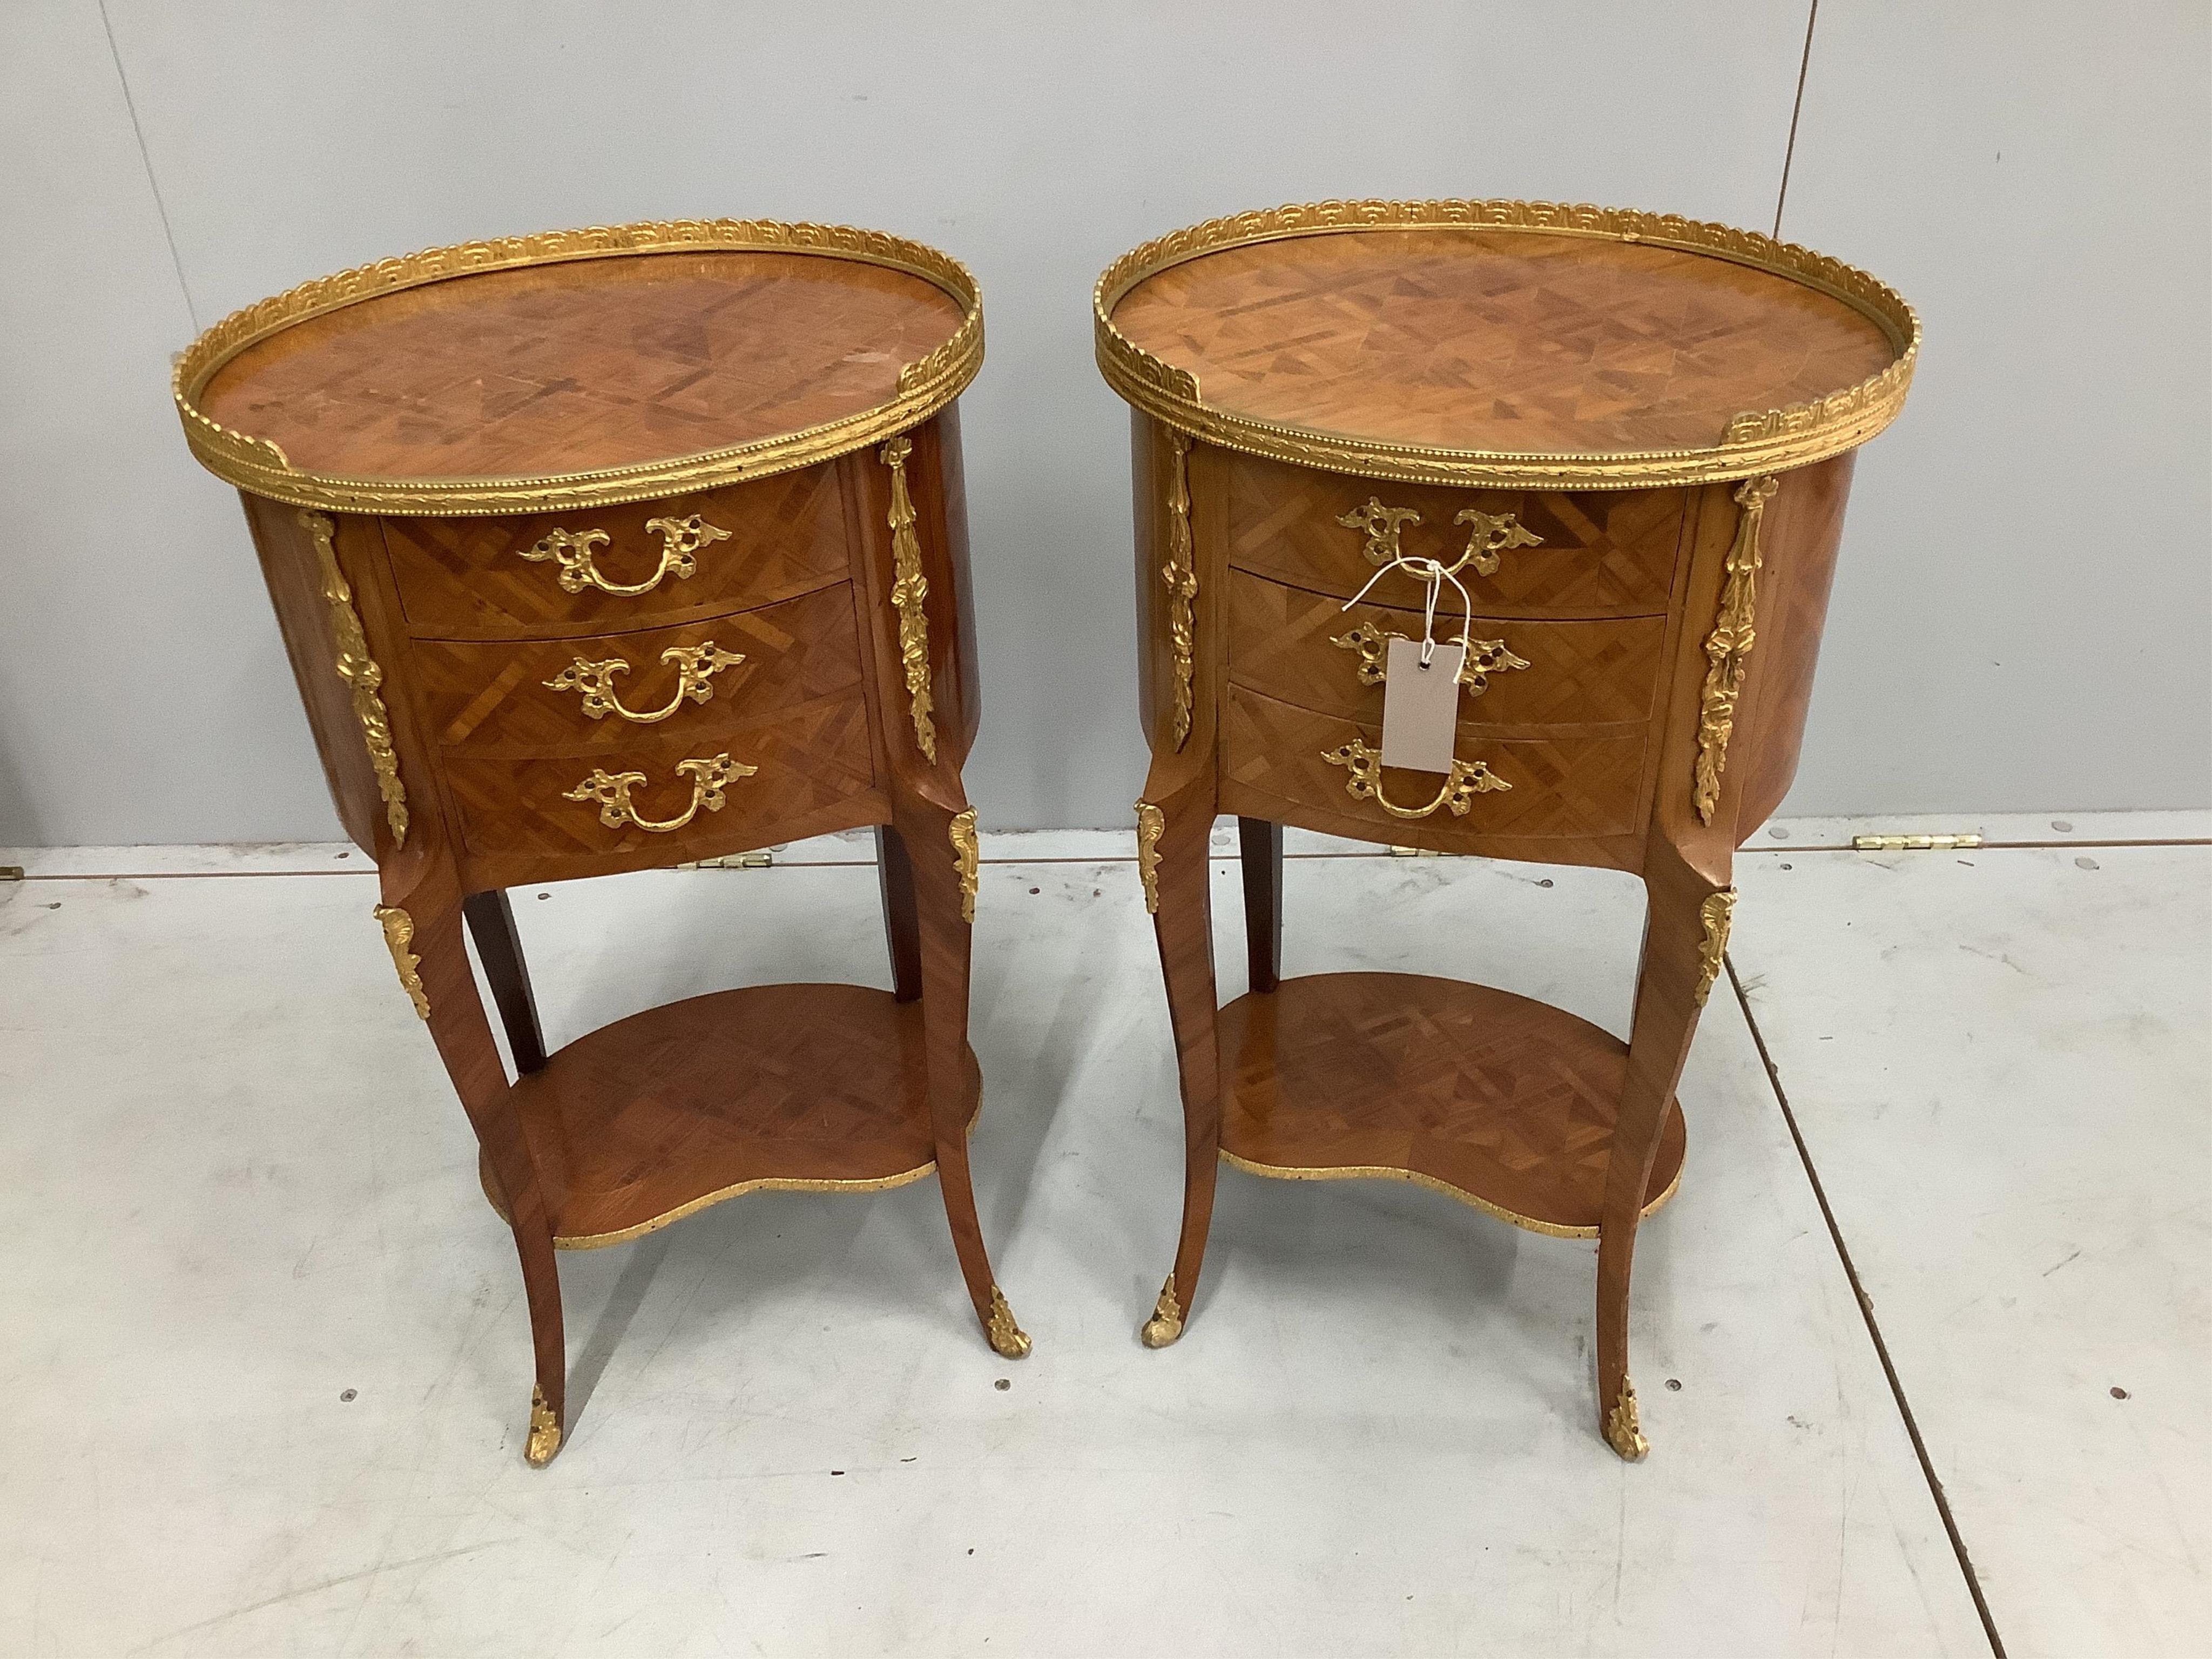 A pair of French transitional style gilt metal mounted kingwood oval three drawer bedside chests, width 40cm, depth 30cm, height 69cm